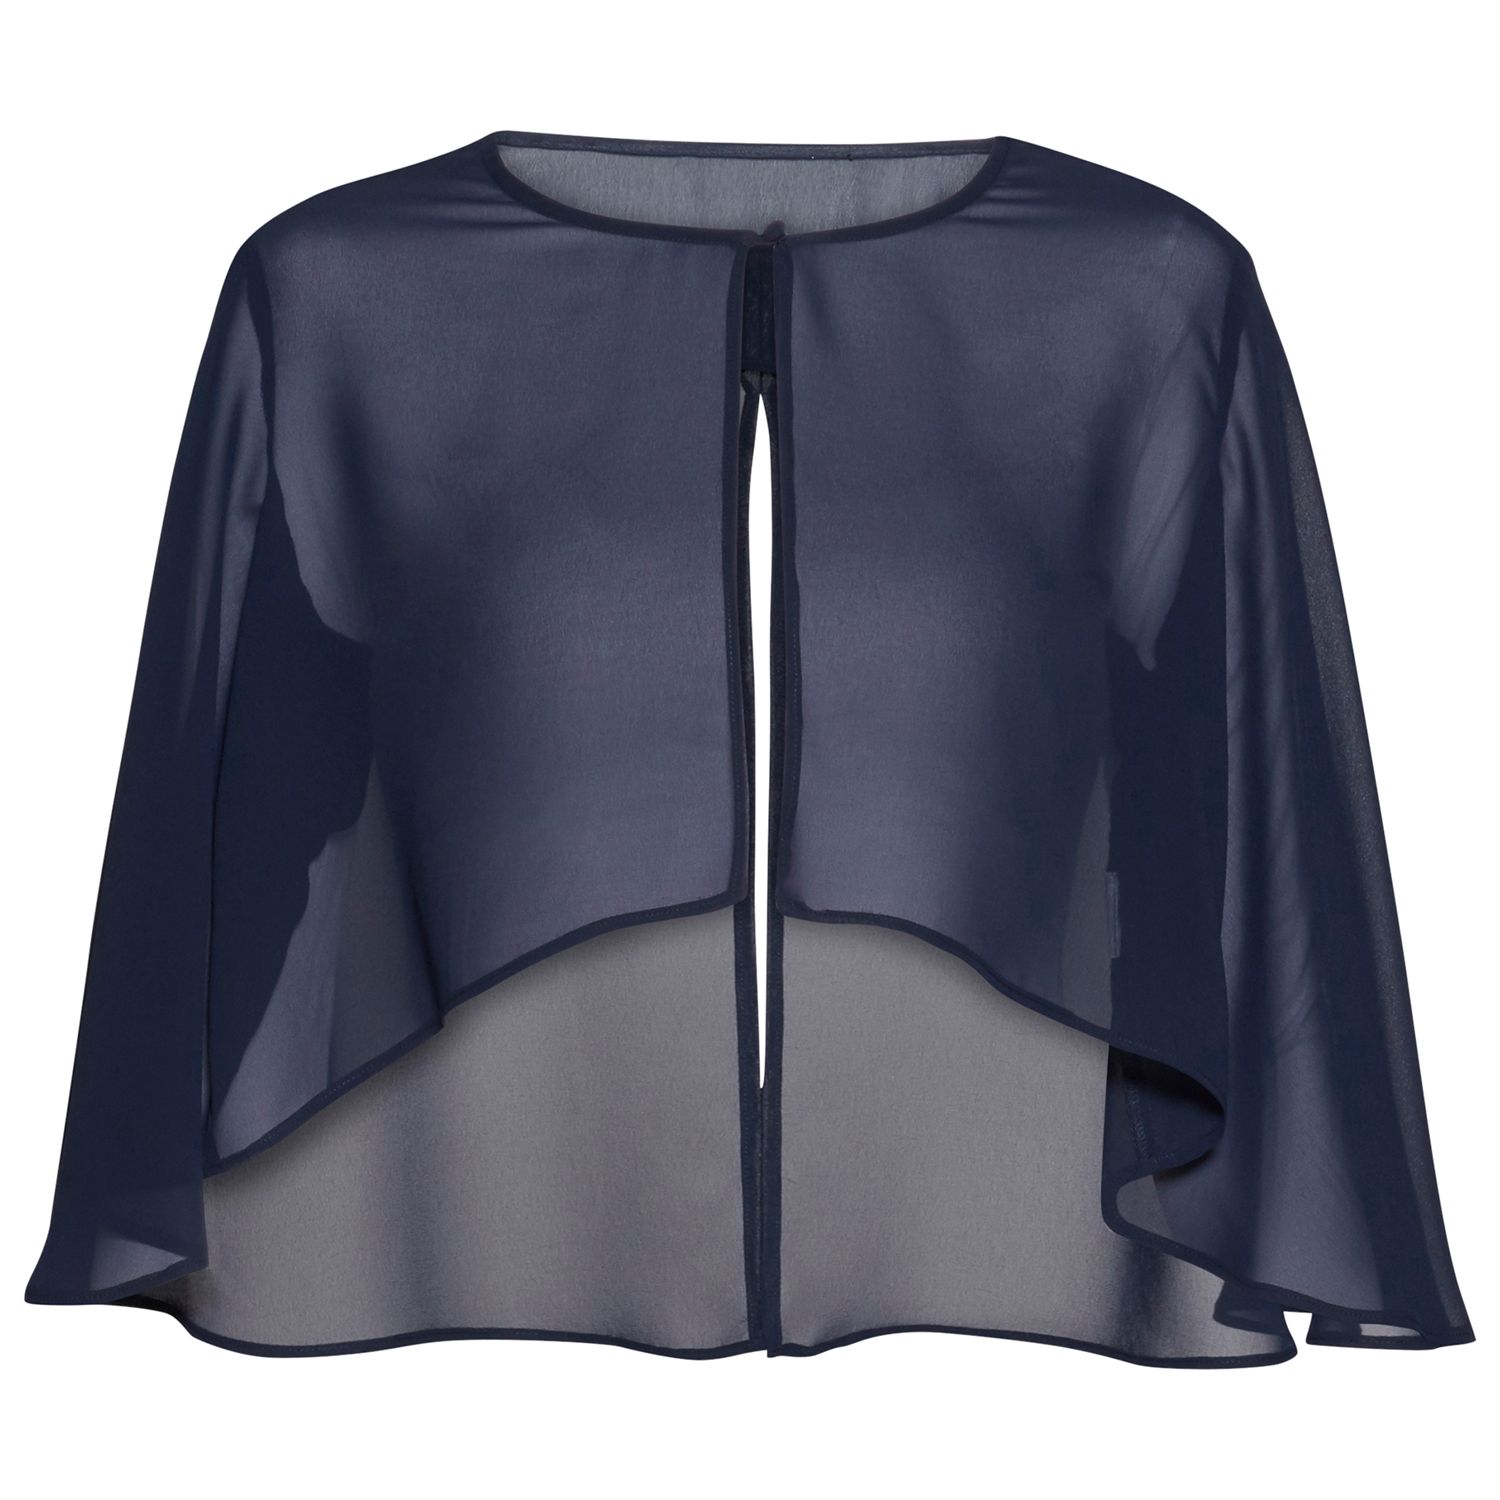 Gina Bacconi Chiffon Cape With Open Back Detail, Spring Navy, 20